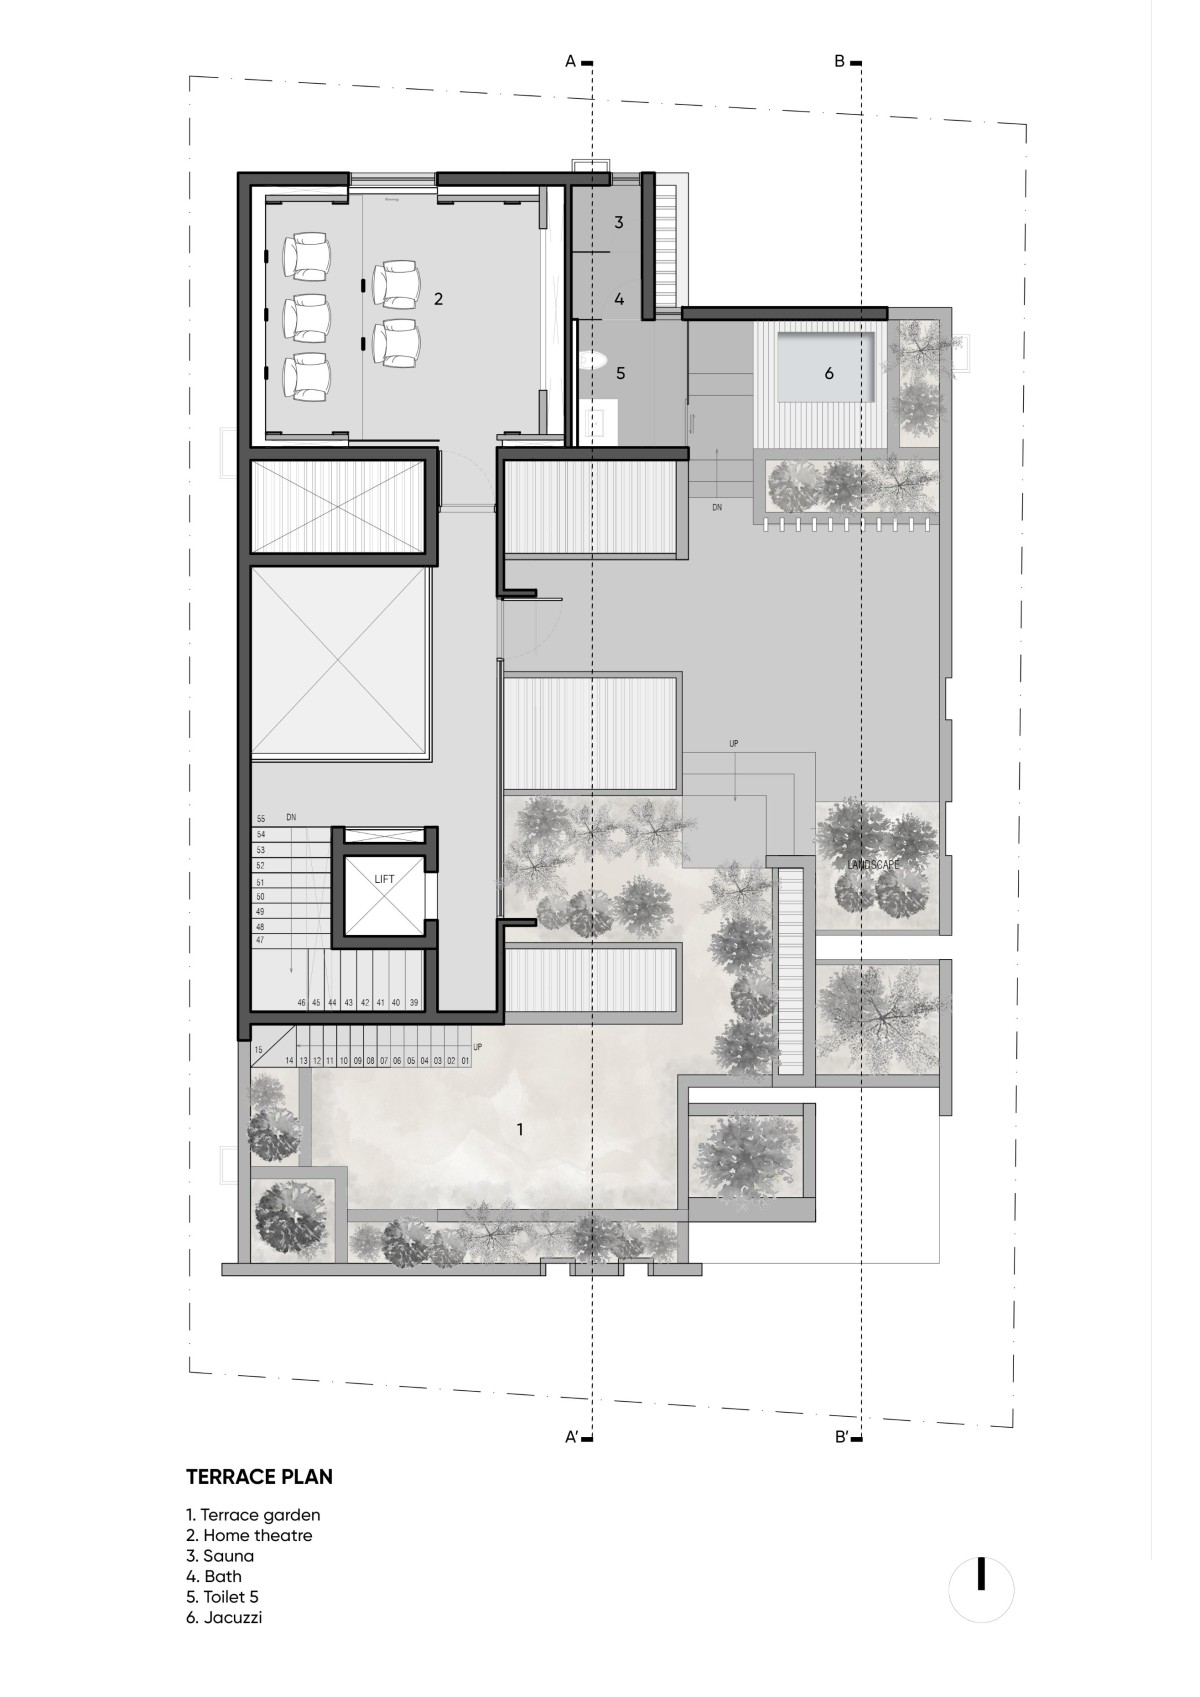 Terrace plan of Janani House by Collage Architecture Studio